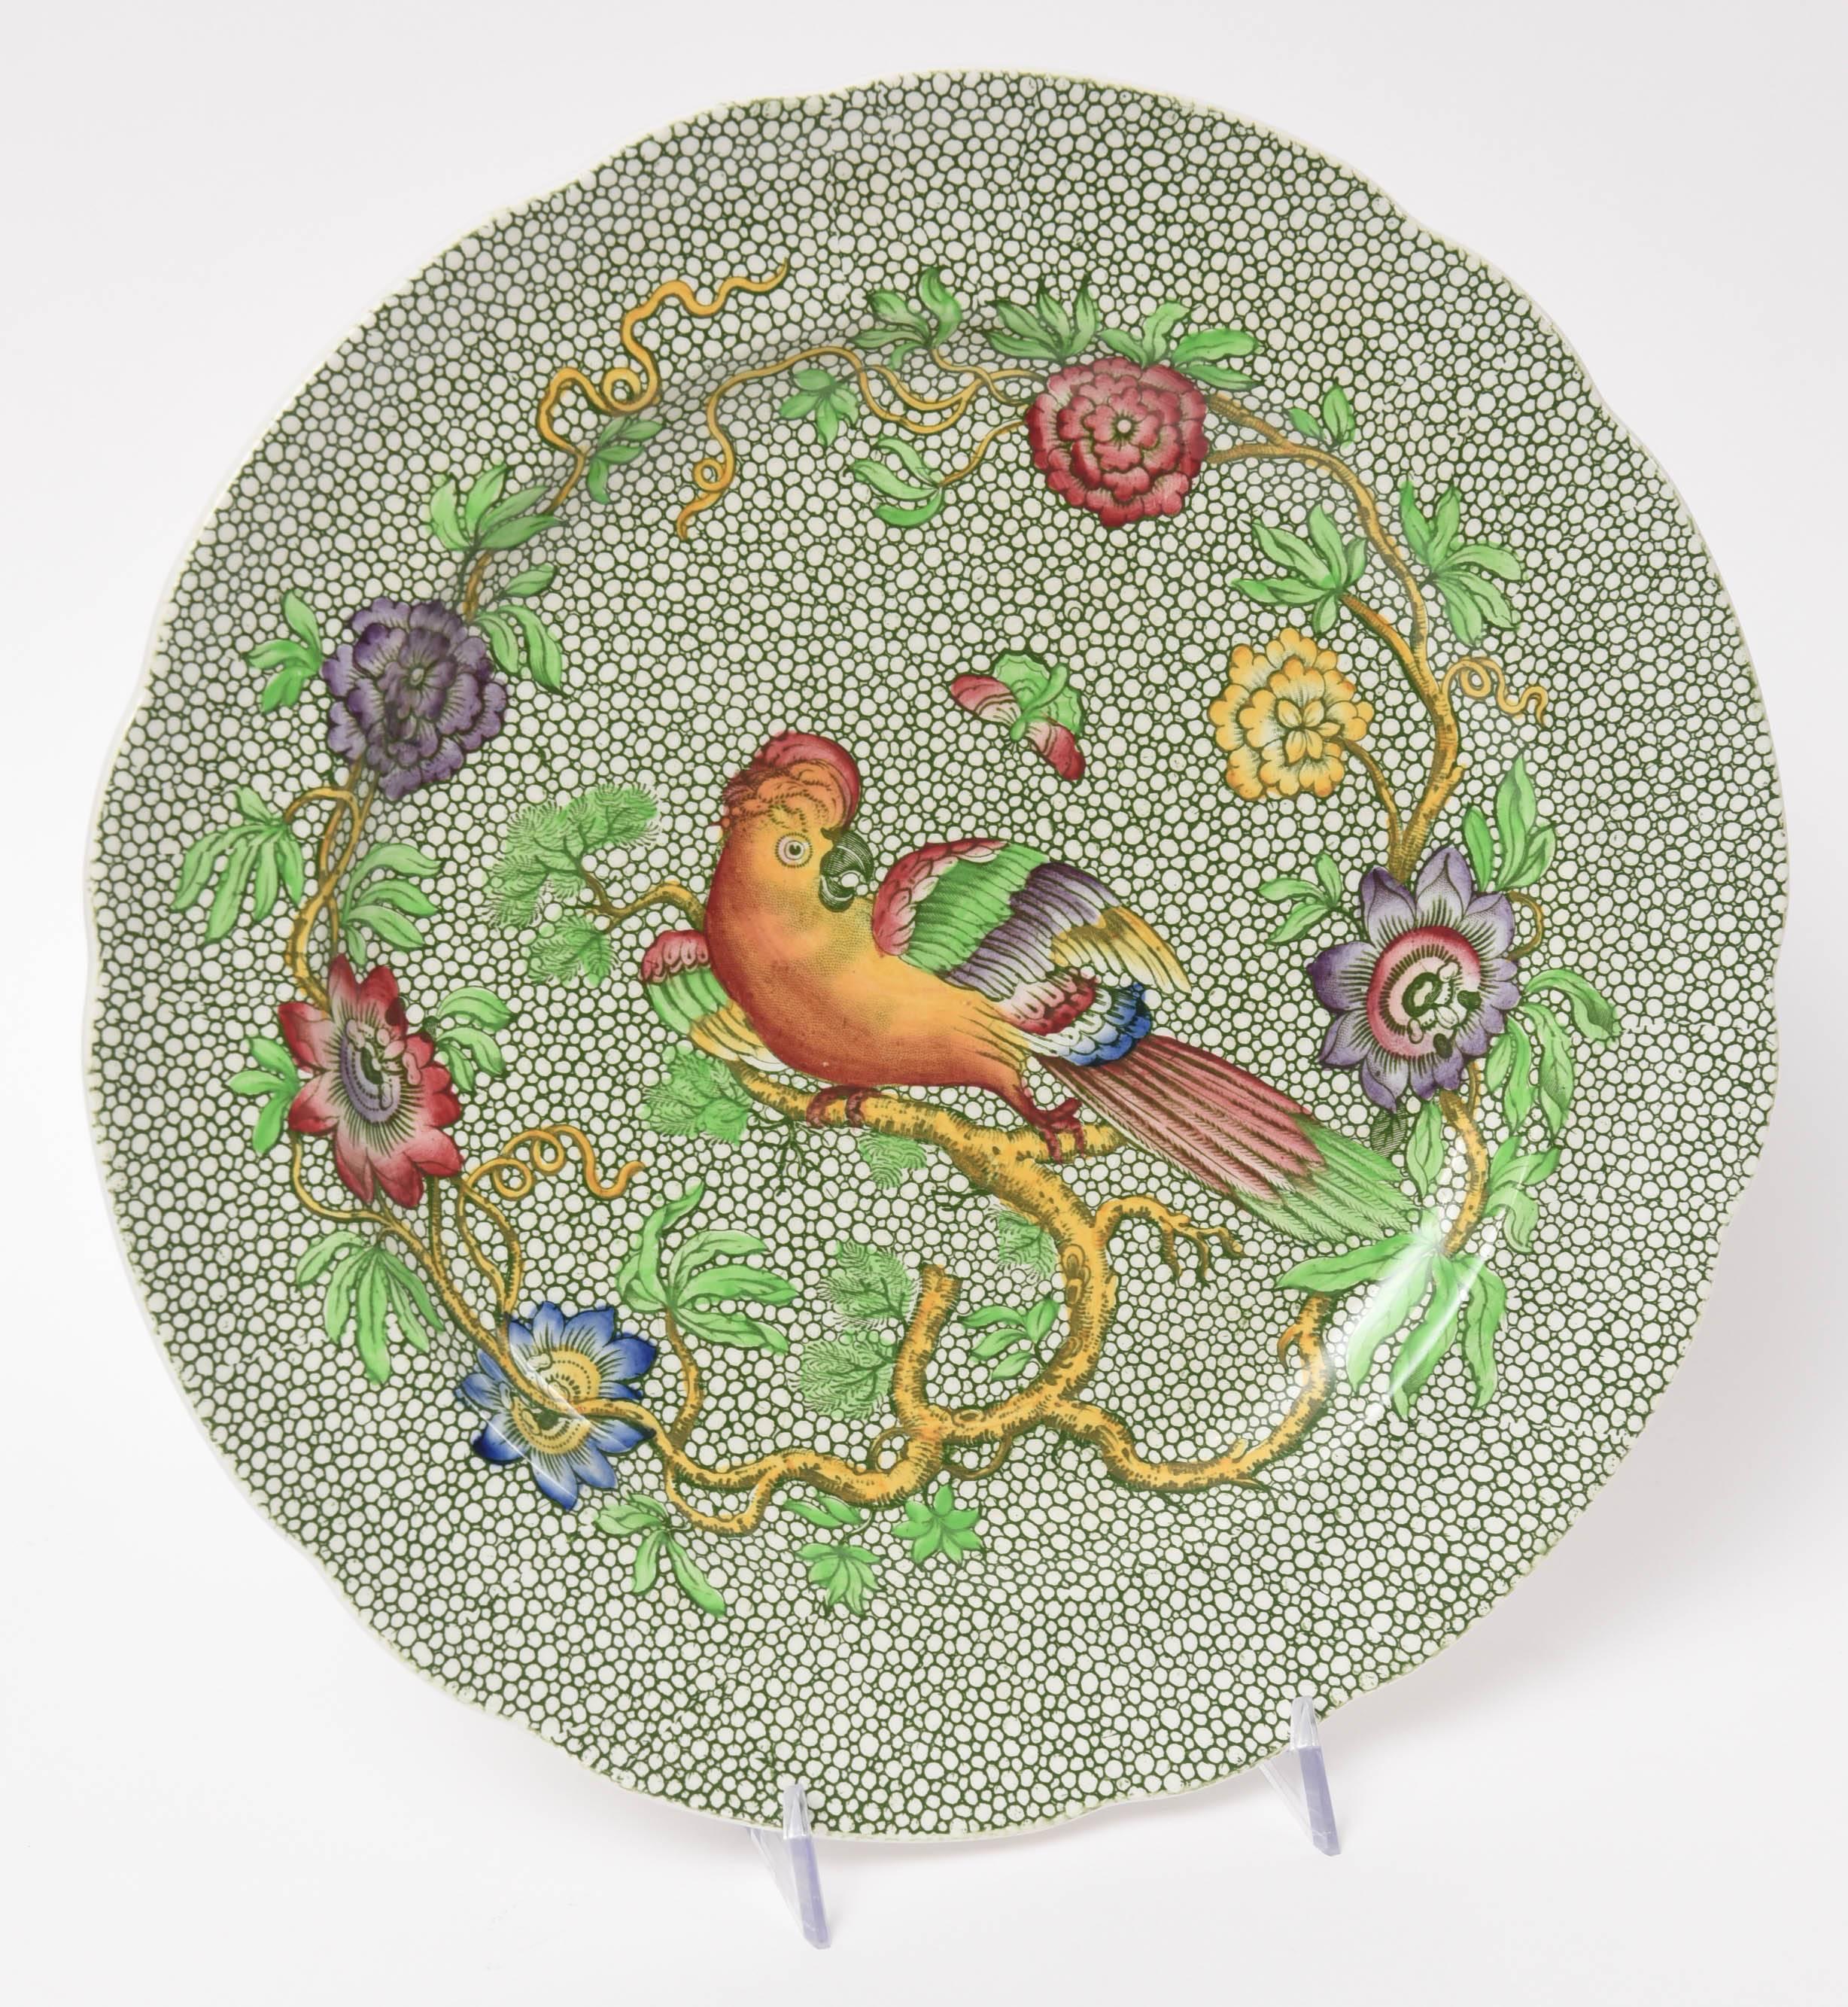 One of our favorite colorful patterns by Spode. Originally issued in the early 1800s these plates bear the hallmark for the 1920s. Lovingly hand colored on their transfer pattern with Spode's all-over 